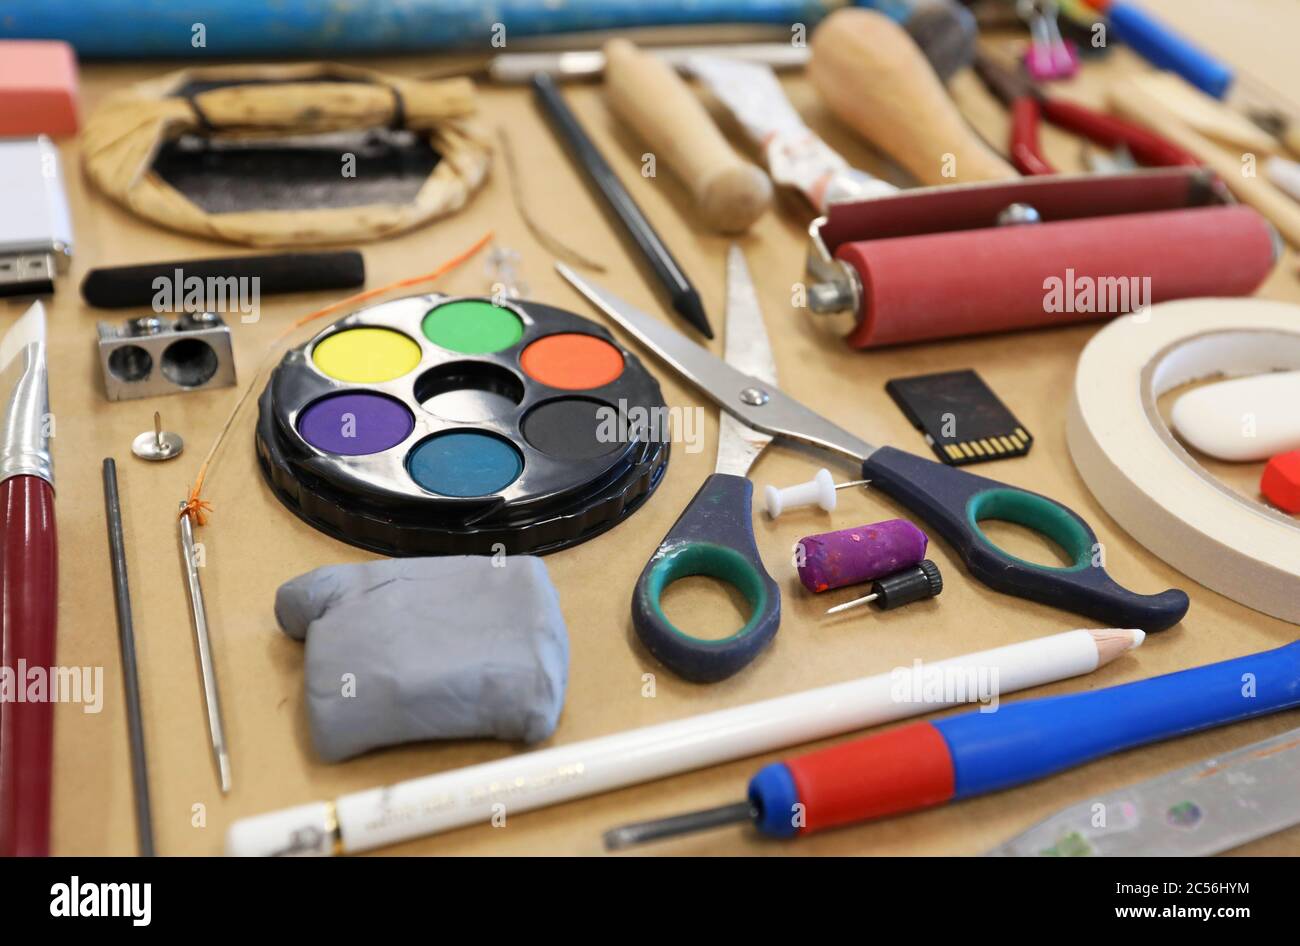 Low angle close up view of visual art artist medias and materials. Scissors paints sharpeners erasers pencils tape pins Creativity art education Stock Photo